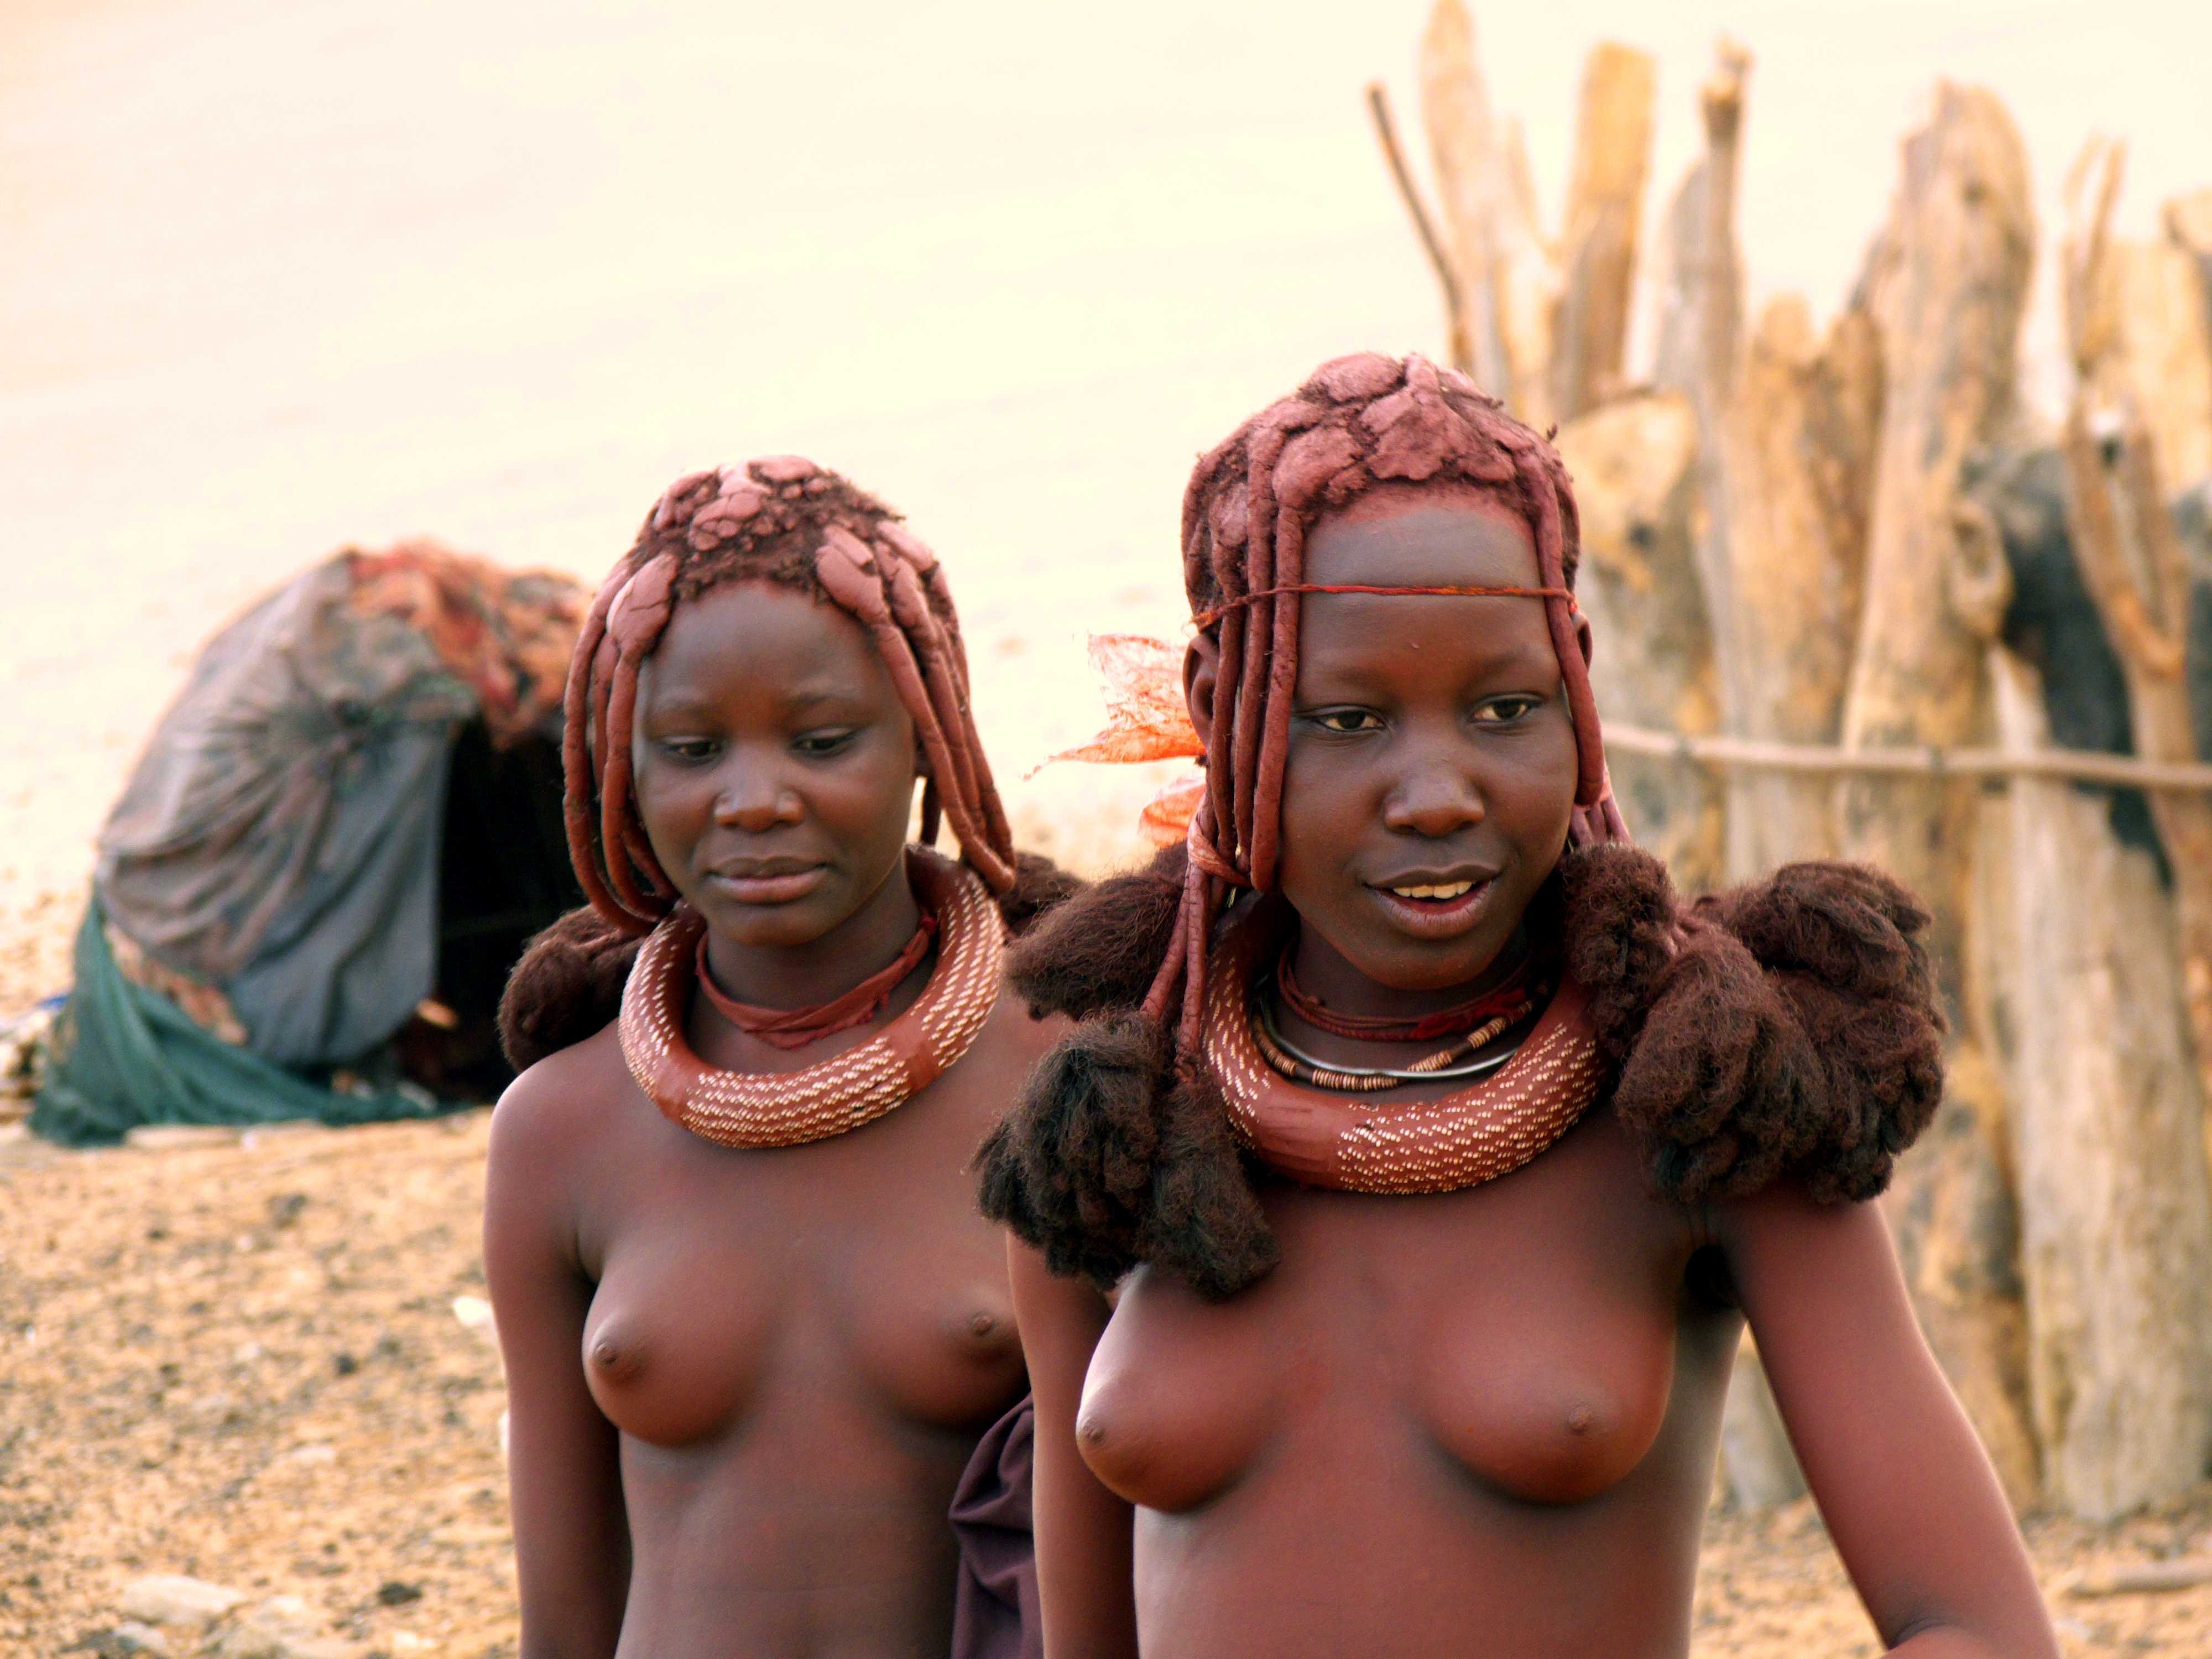 You are looking on "https://boobsphoto.name/11772-naked-african-women-tribes...